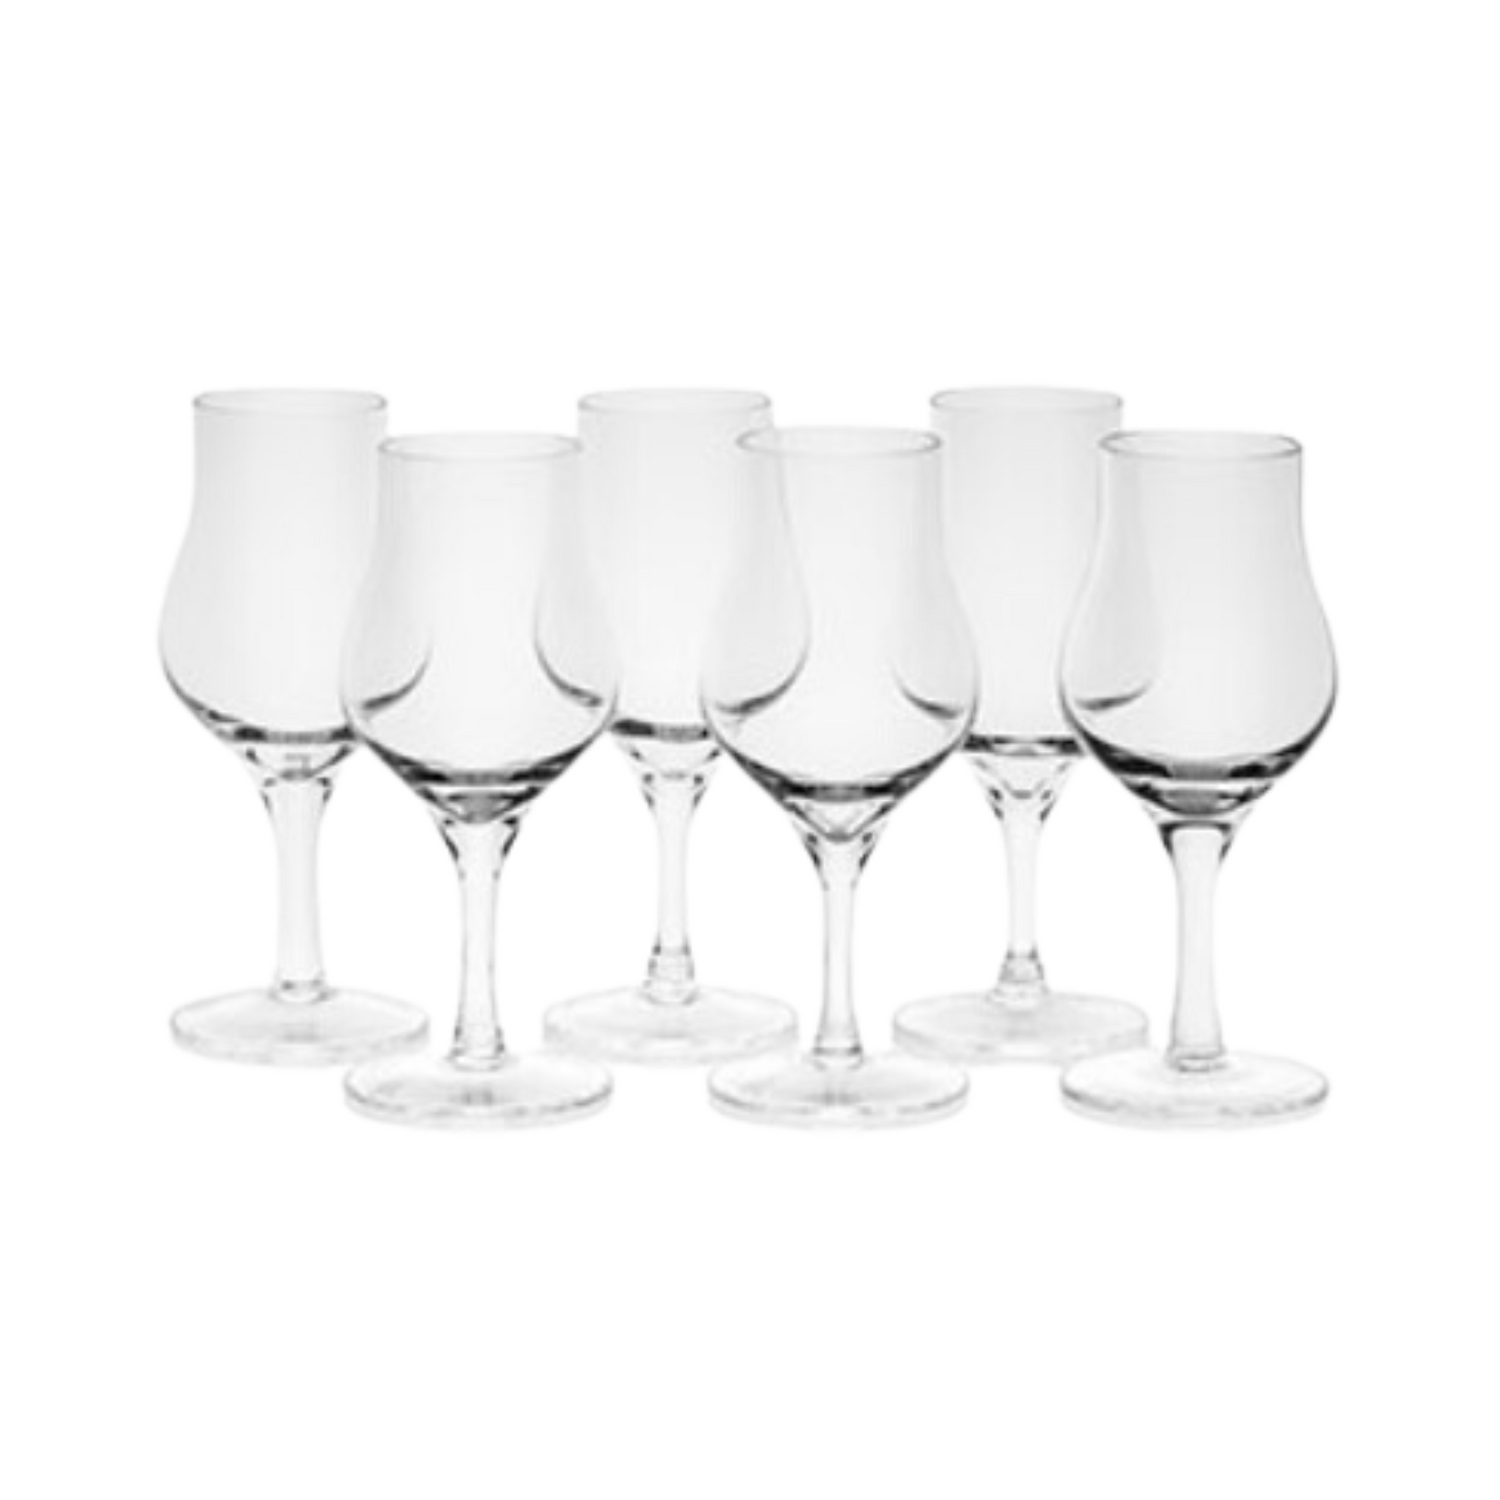 Amber Handmade Whisky Nosing & Tasting Glasses G100 - Pack of 6 (Without Lid or Gift Box)